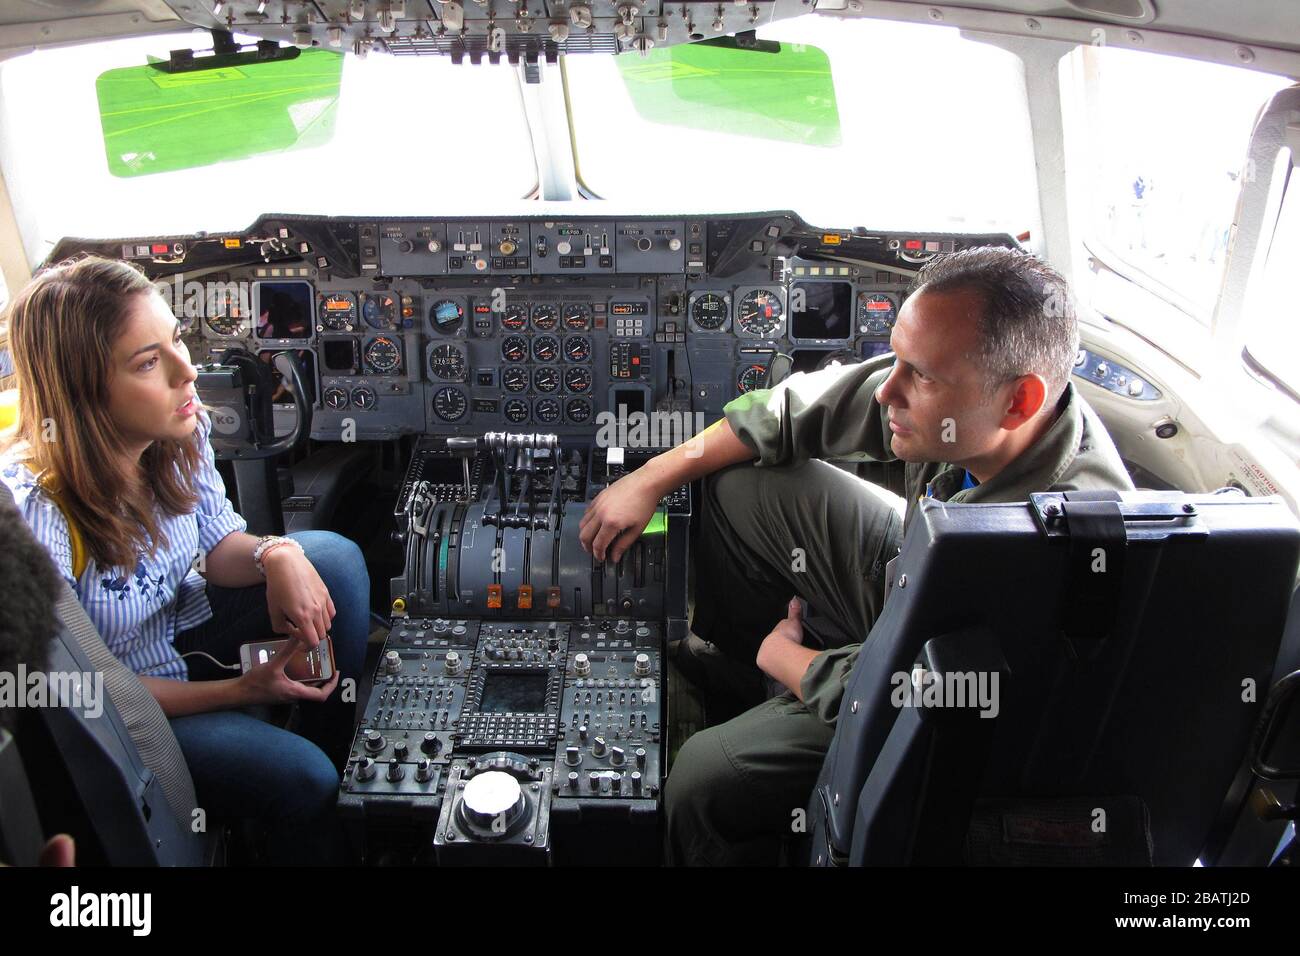 'English: Juanita Gomes, a reporter from Noticias Caracol television in Bogota, interviews U.S. Air Force Senior Master Sgt. Russell Downie, with the 79th Aerial Refueling Squadron from Travis Air Force Base, Calif., in the cockpit of a KC-10 during the Colombian Air Force’s Feria Aeronautica Internaccional – Colombia in Rionegro,  July 14, 2017. The United States Air Force is participating in the four-day air show with two South Carolina Air National Guard F-16s as static displays, plus static displays of a KC-135, KC-10, along with an aerial demonstration by the Air Combat Command’s Viper Ea Stock Photo